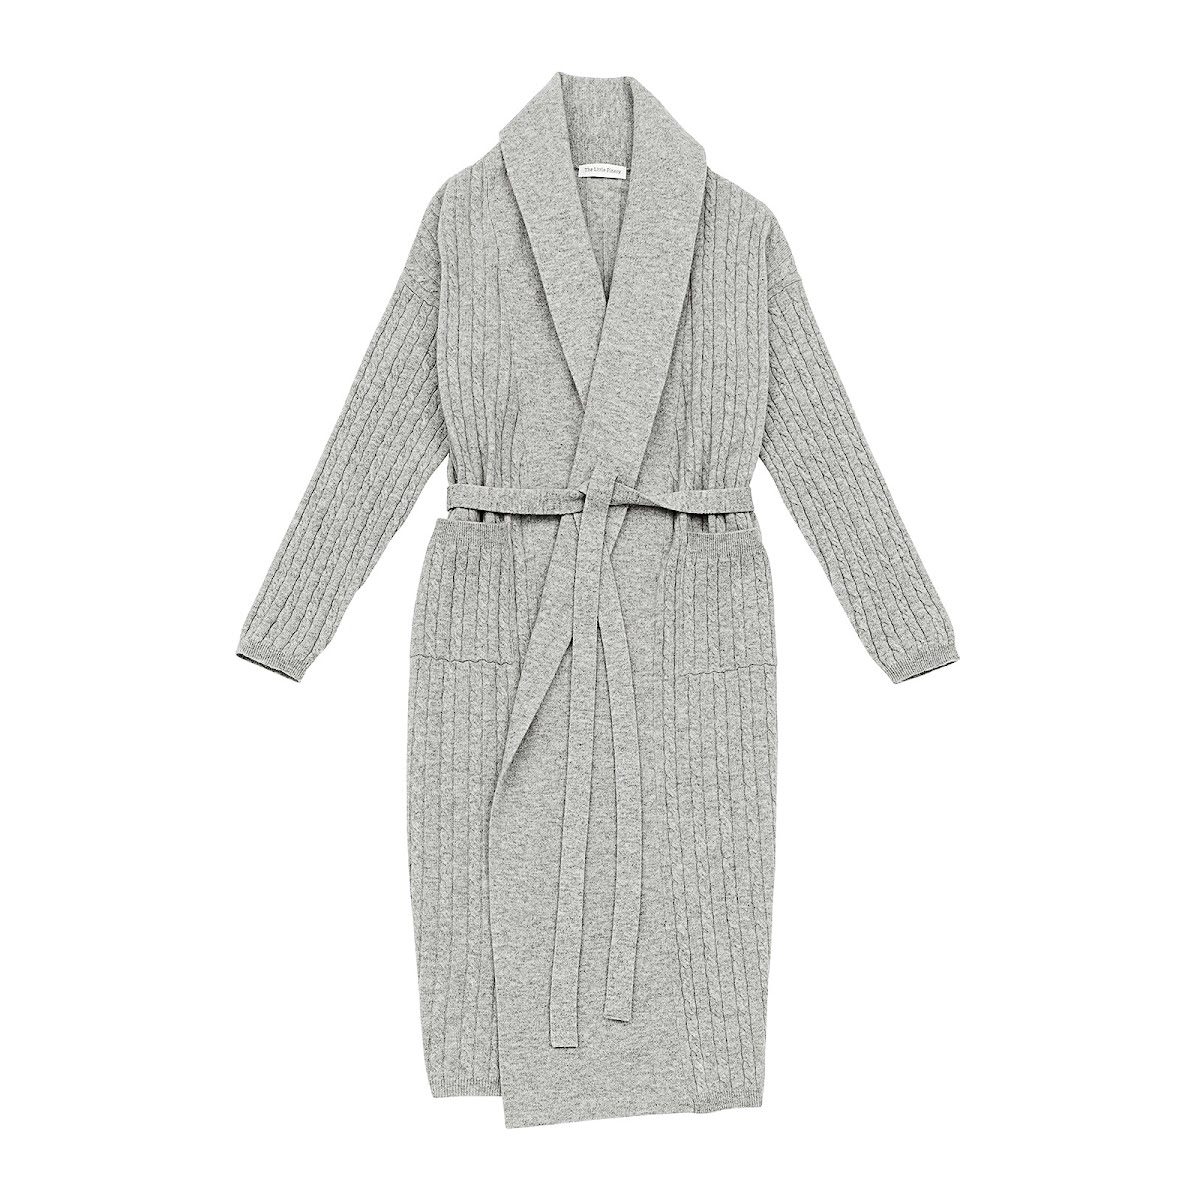 The Little Finery Cashmere Robe, €391.95